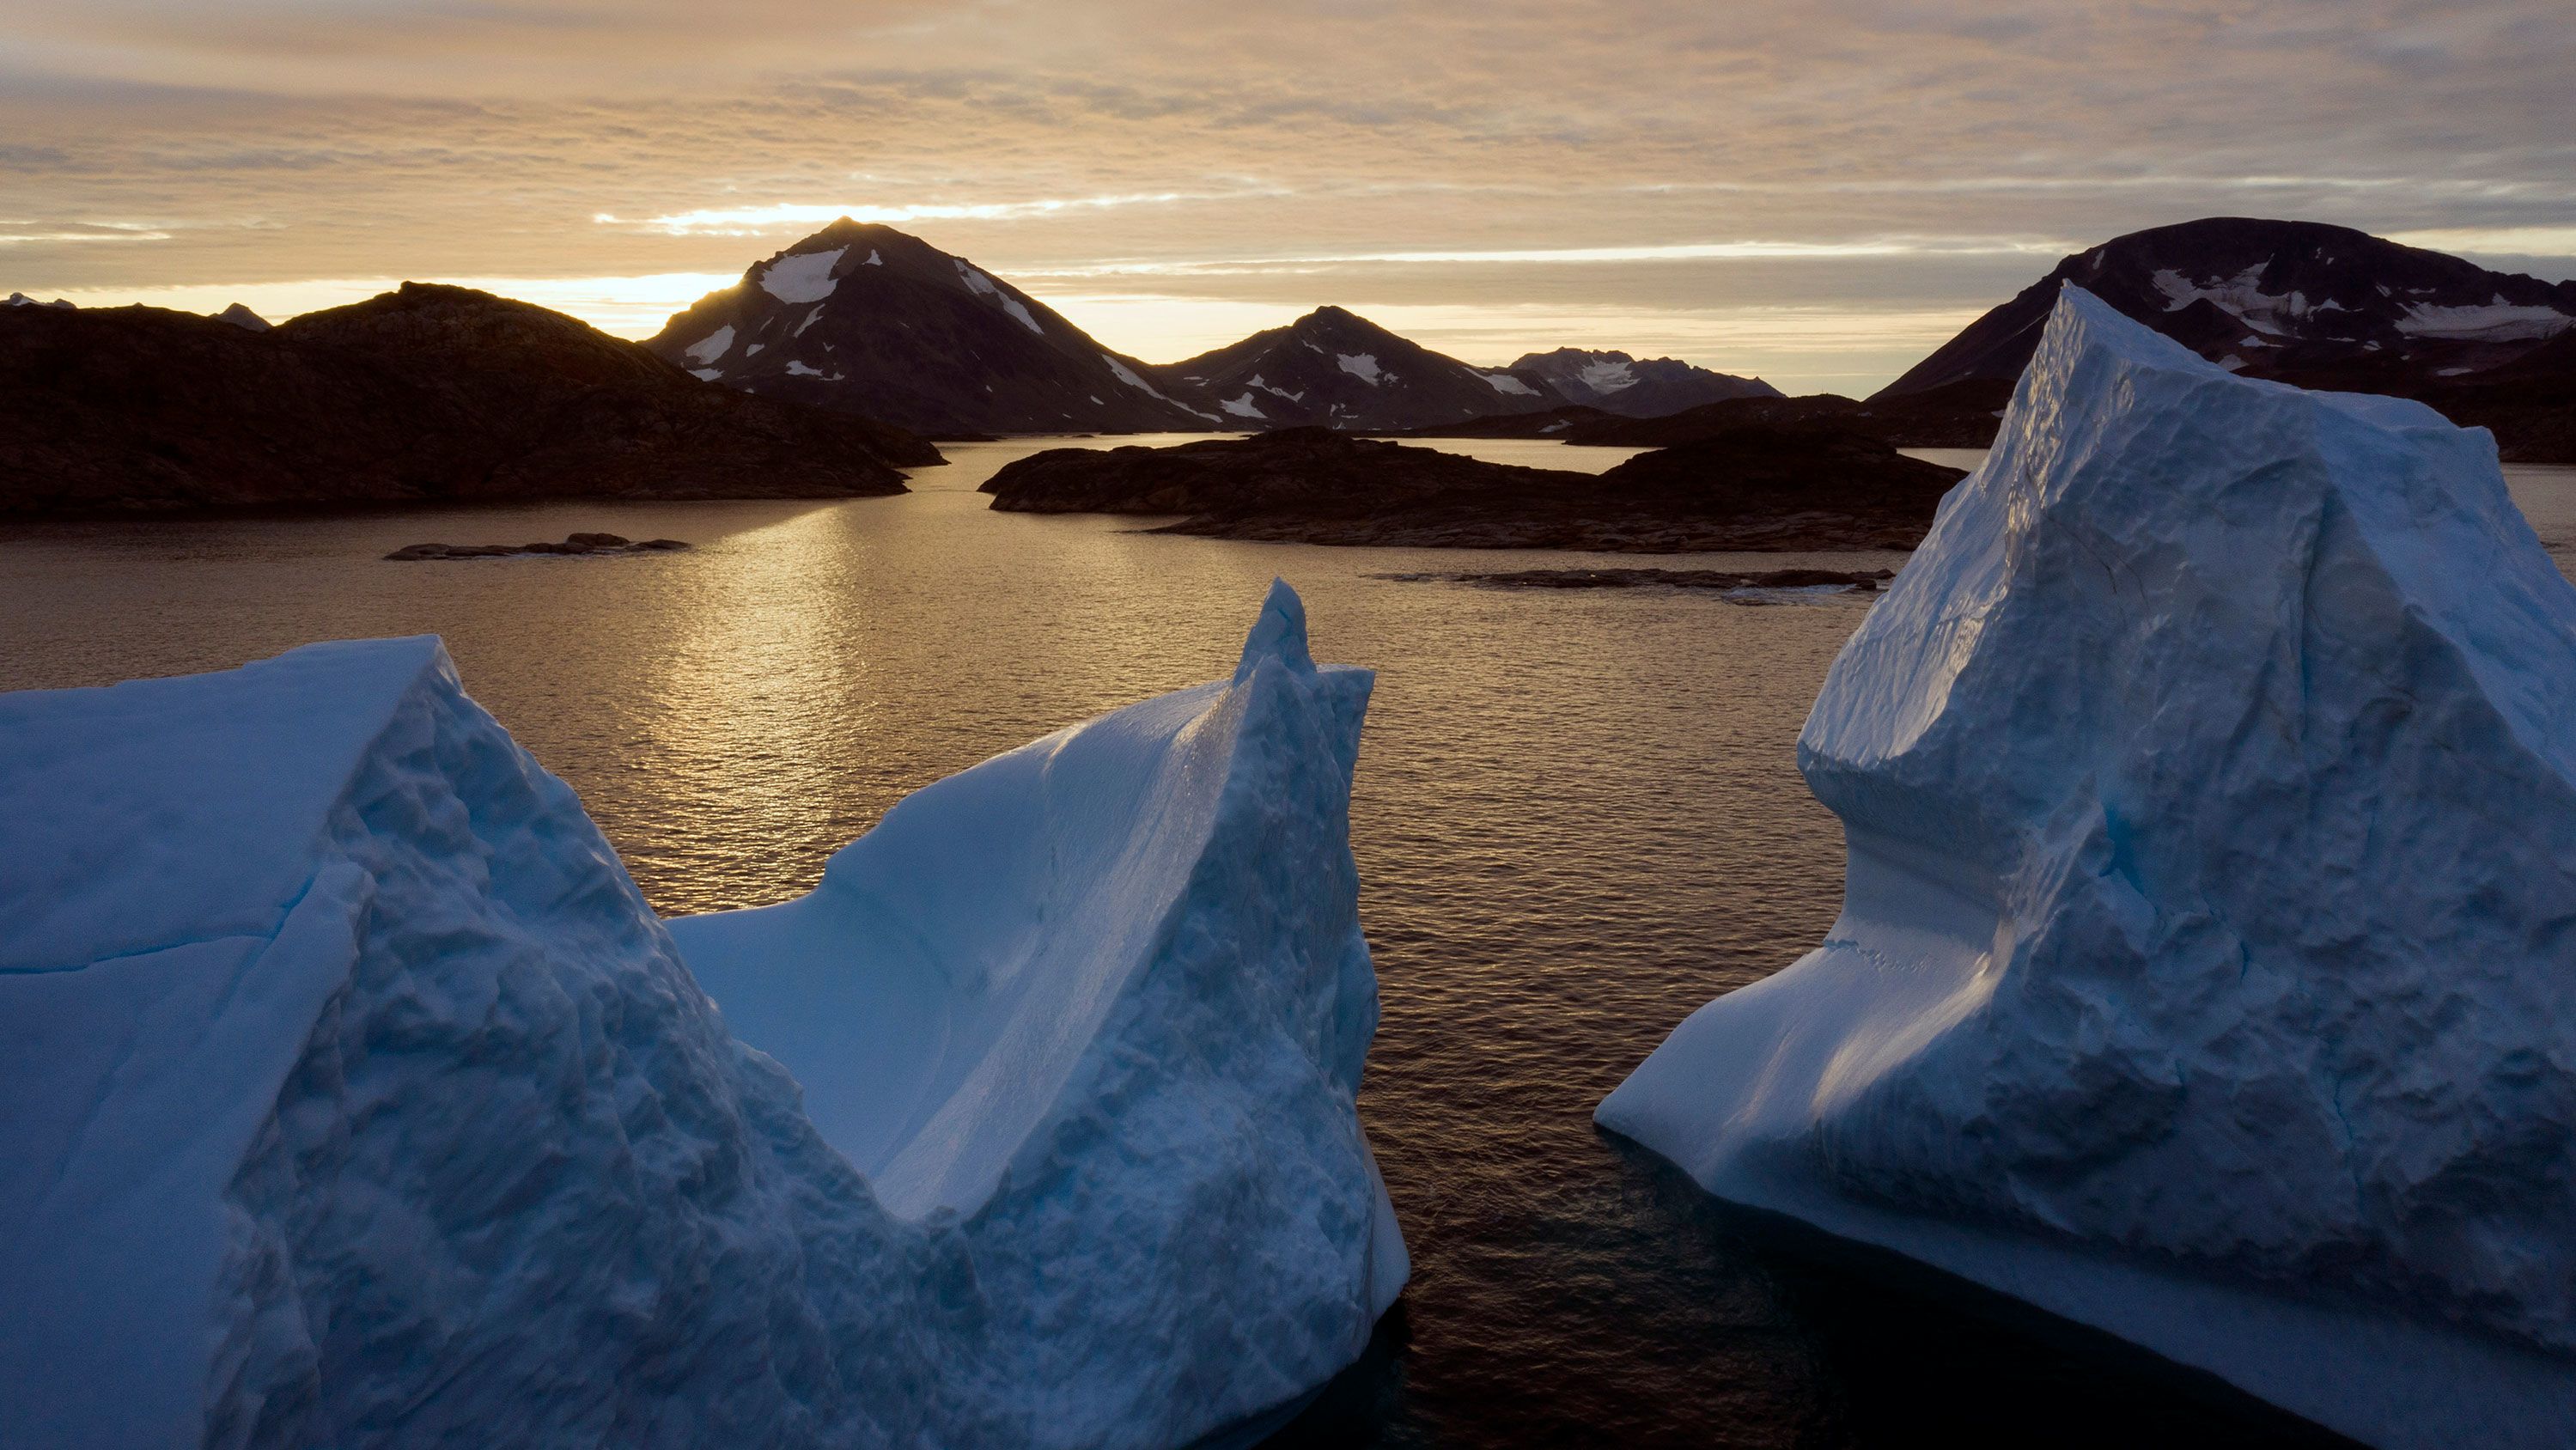 Greenland has been melting at an alarming rate in the last decade, and this summer it saw two unprecedented late-season melt events.